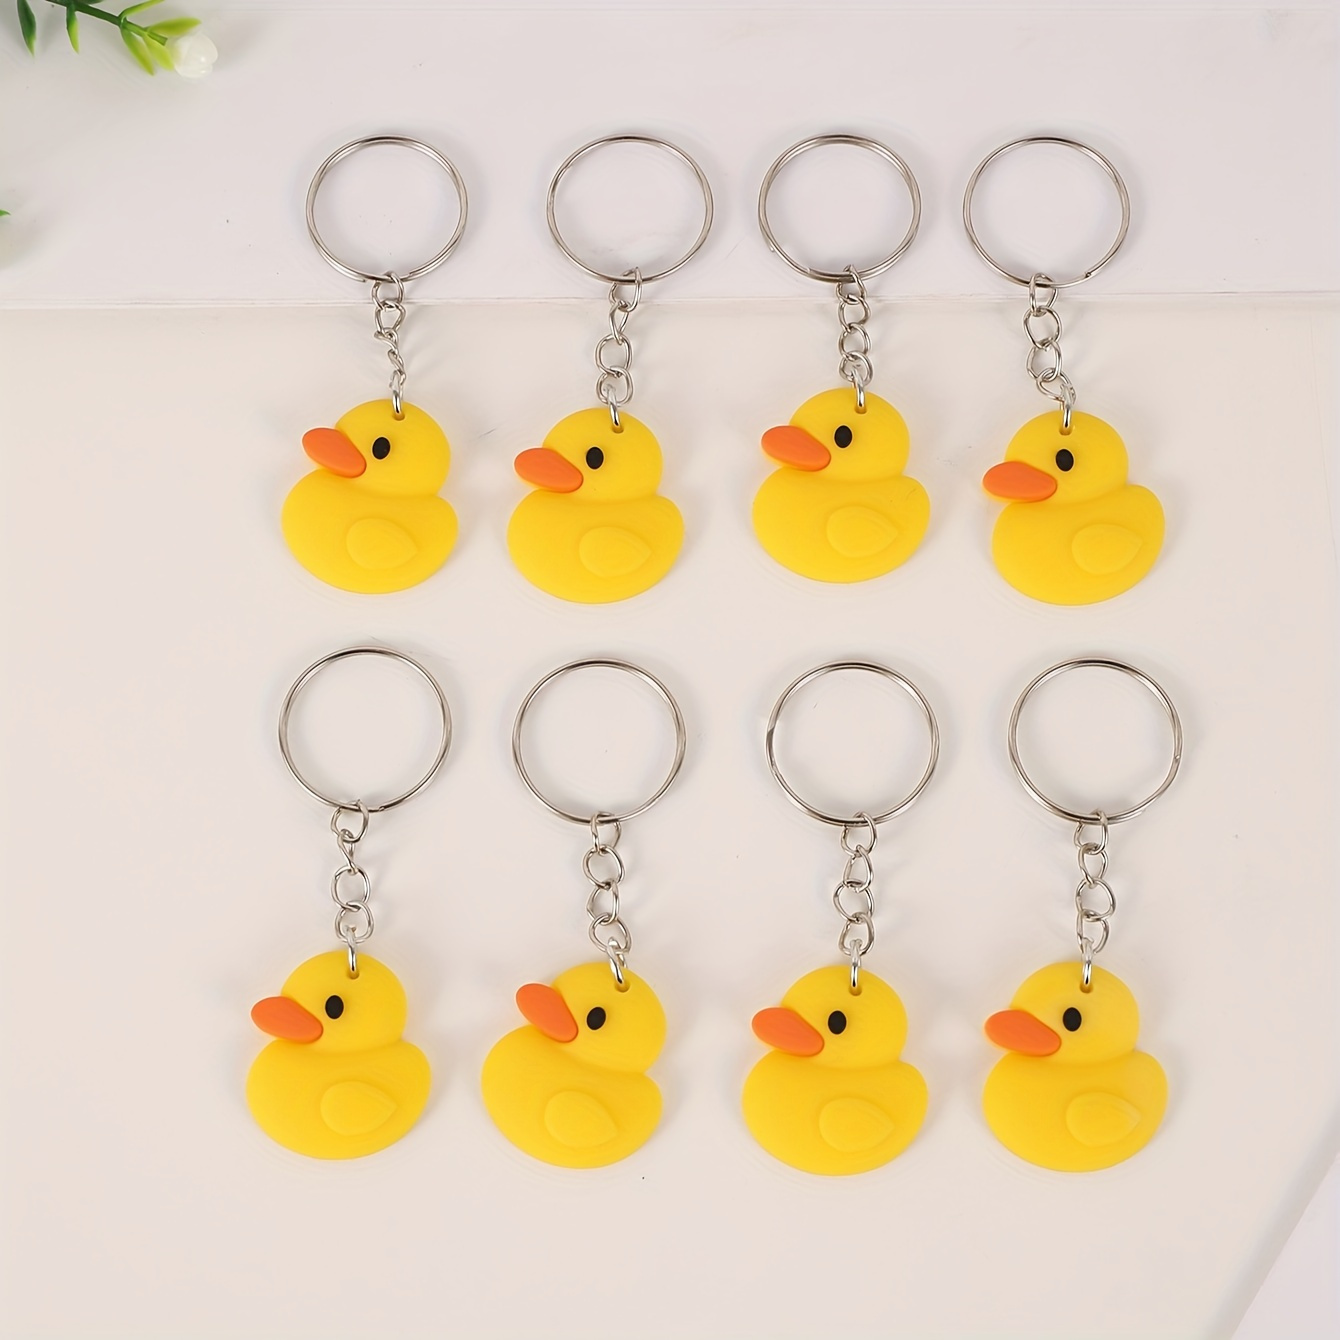 

8pcs Cartoon Duck Keychains, Cute Diy Rubber Ducky Charms, Women's Bag Accessories, Novelty Keyring For Gifts